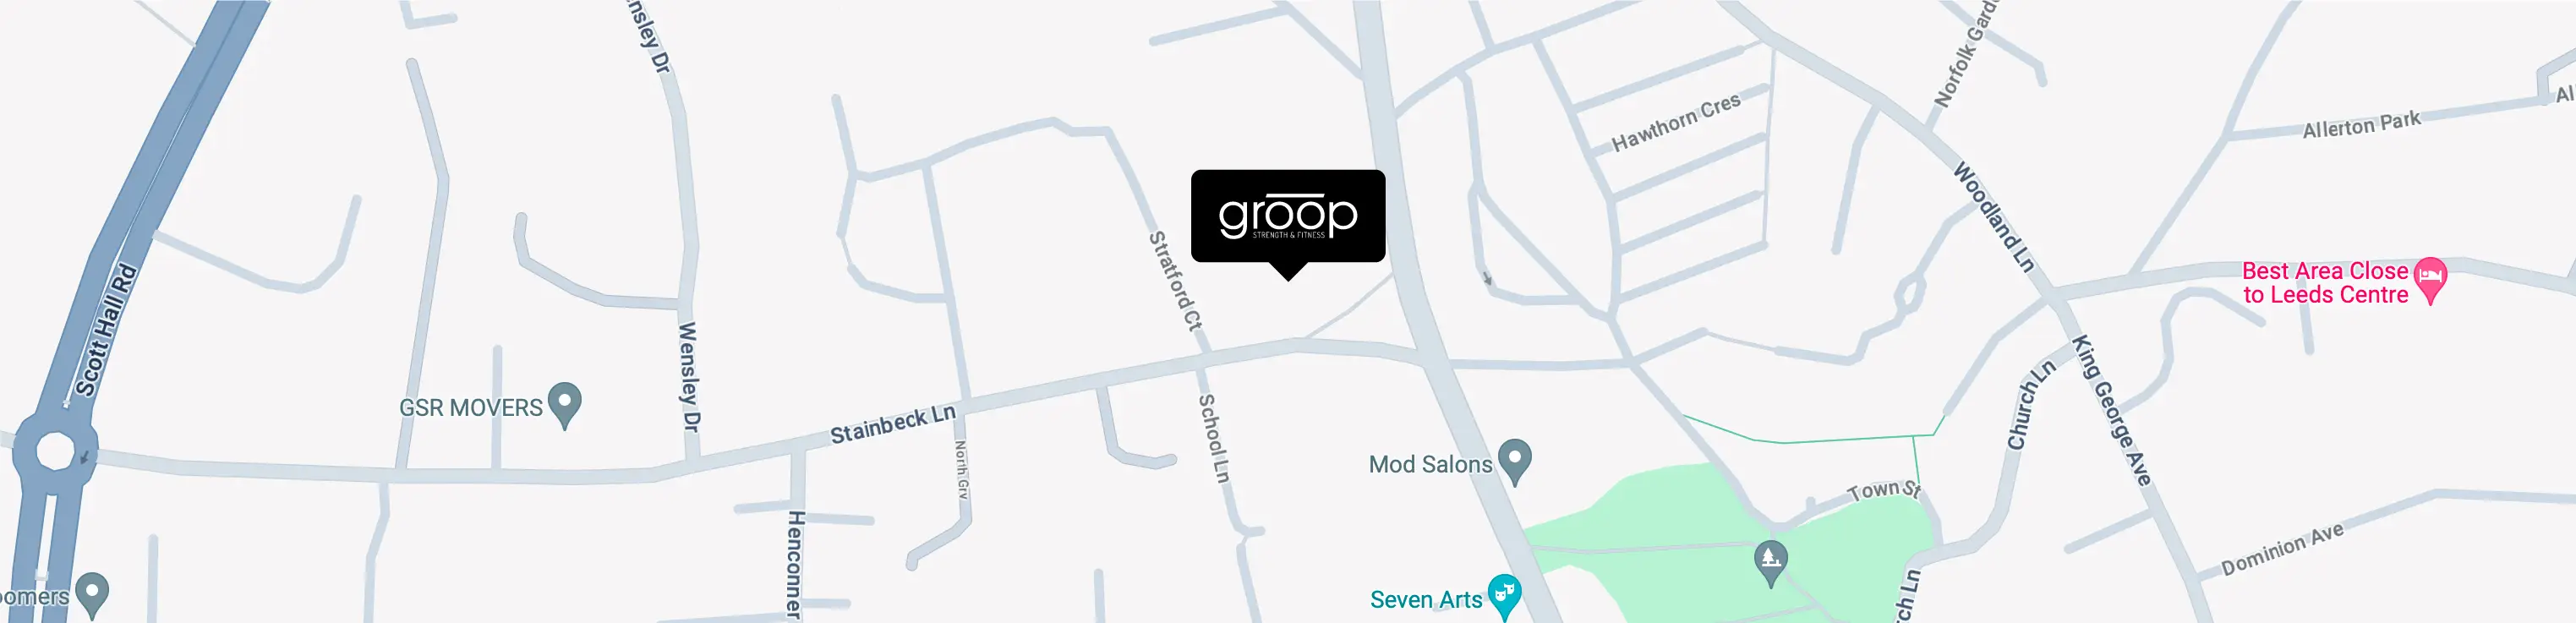 an image displaying Groop's location